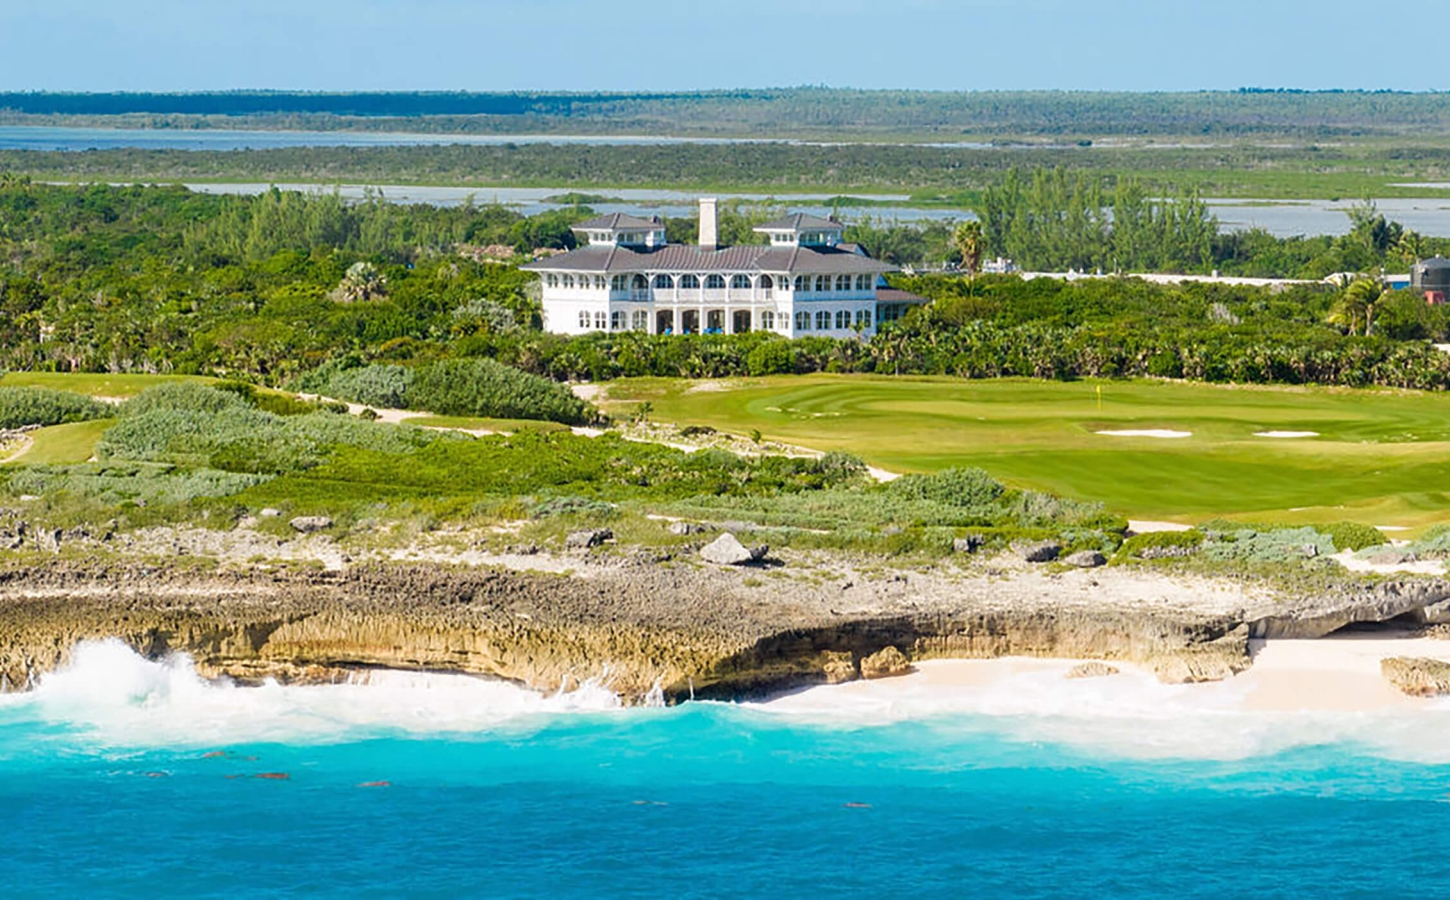 The Abaco Club Golf Course